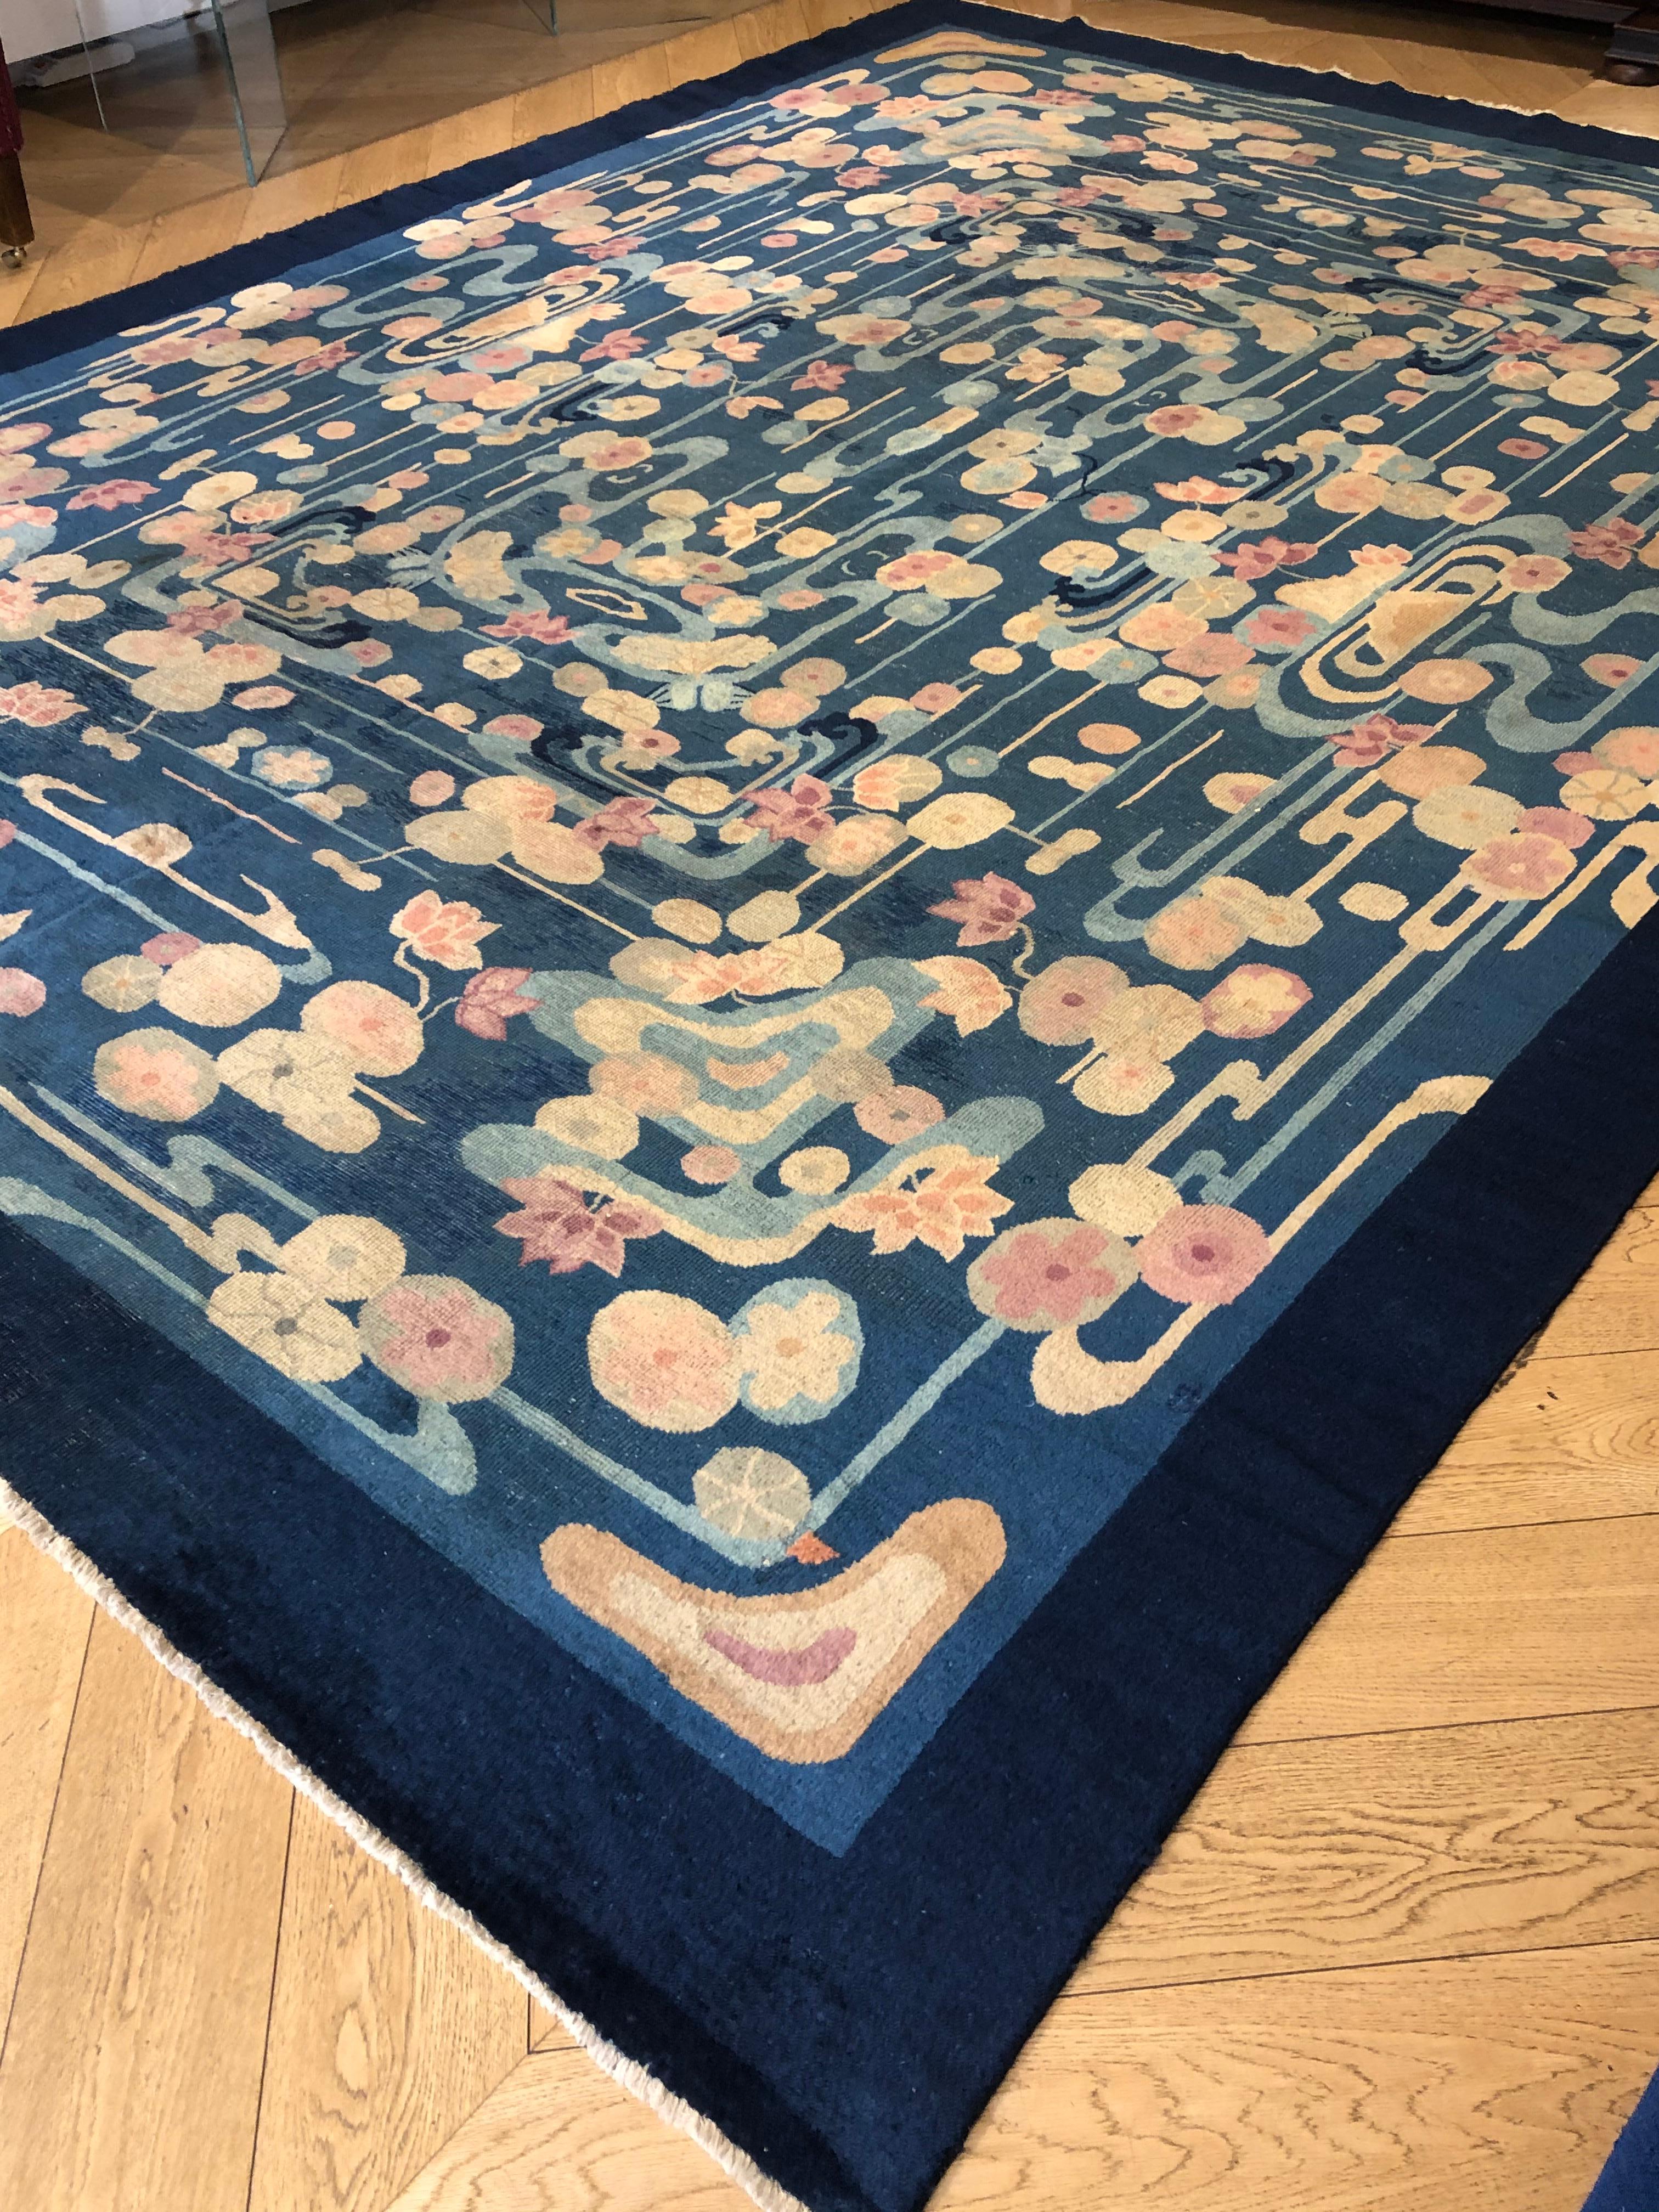 An important and rare example of a Chinese-made Art Deco Liberty carpet.
The decoration reproduces a pond full of water lilies and other aquatic flowers in a harmonious composition that develops symmetrically.
The flowers, like all the other